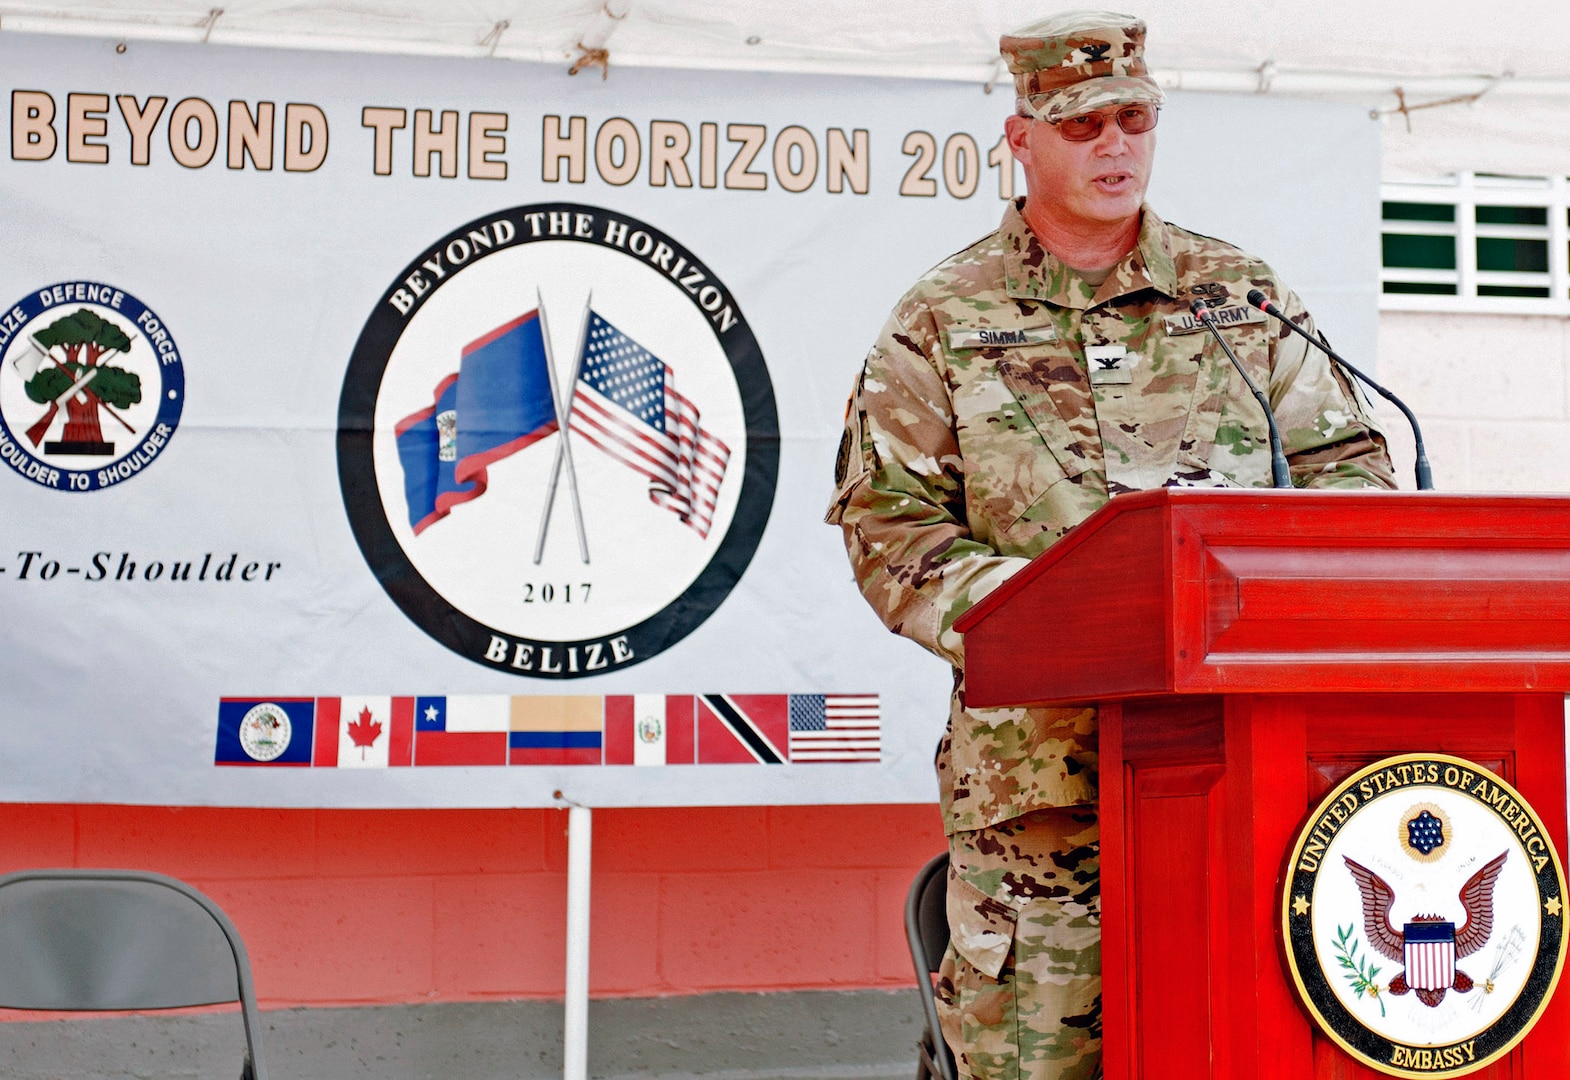 Col. John Simma, Commander for Beyond the Horizon 2017  Task Force Jaguar, speaks a the Ladyville Health Center Ribbon Cutting Ceremony June 9. BTH is a collaborative training event between U.S. Army South, the Belize Defence Force, other Central American nations and local and international NGO's providing medical and engineering services throughout Belize. Simma said the engineering projects and health events conducted during BTH uncluded approximately 1,900 U.S. Military members from the Army, Air Force, Marine Reserves and National Guard who worked shoulder-to-shoulder with members of the BDF, an Engineer Regiment from Trinidad and Tobago, and soldiers from the Columbian military.